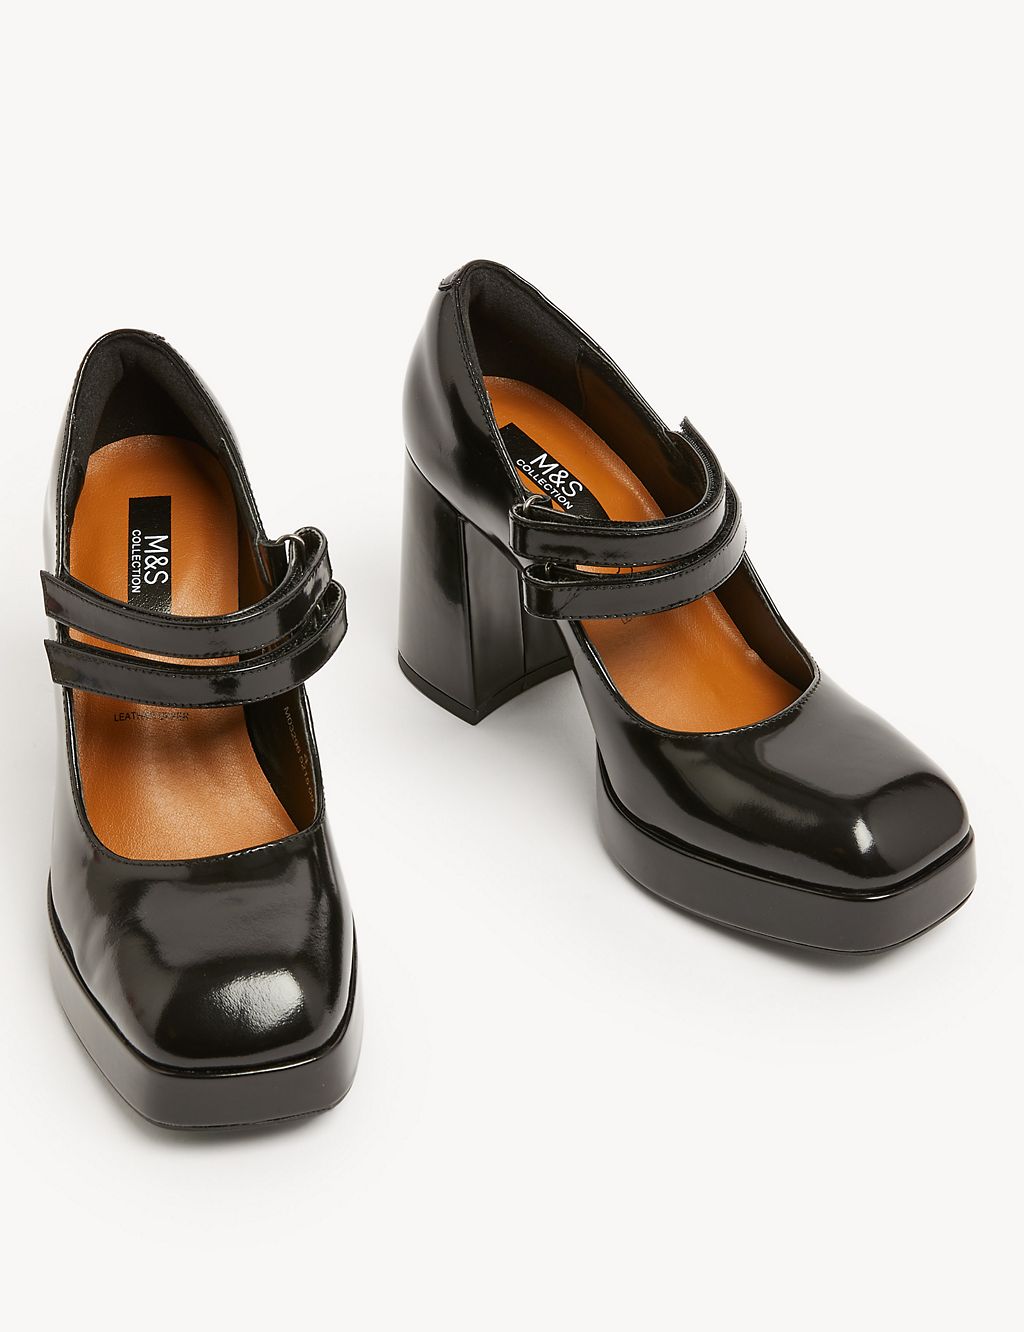 Leather Patent Platform Court Shoes 1 of 3